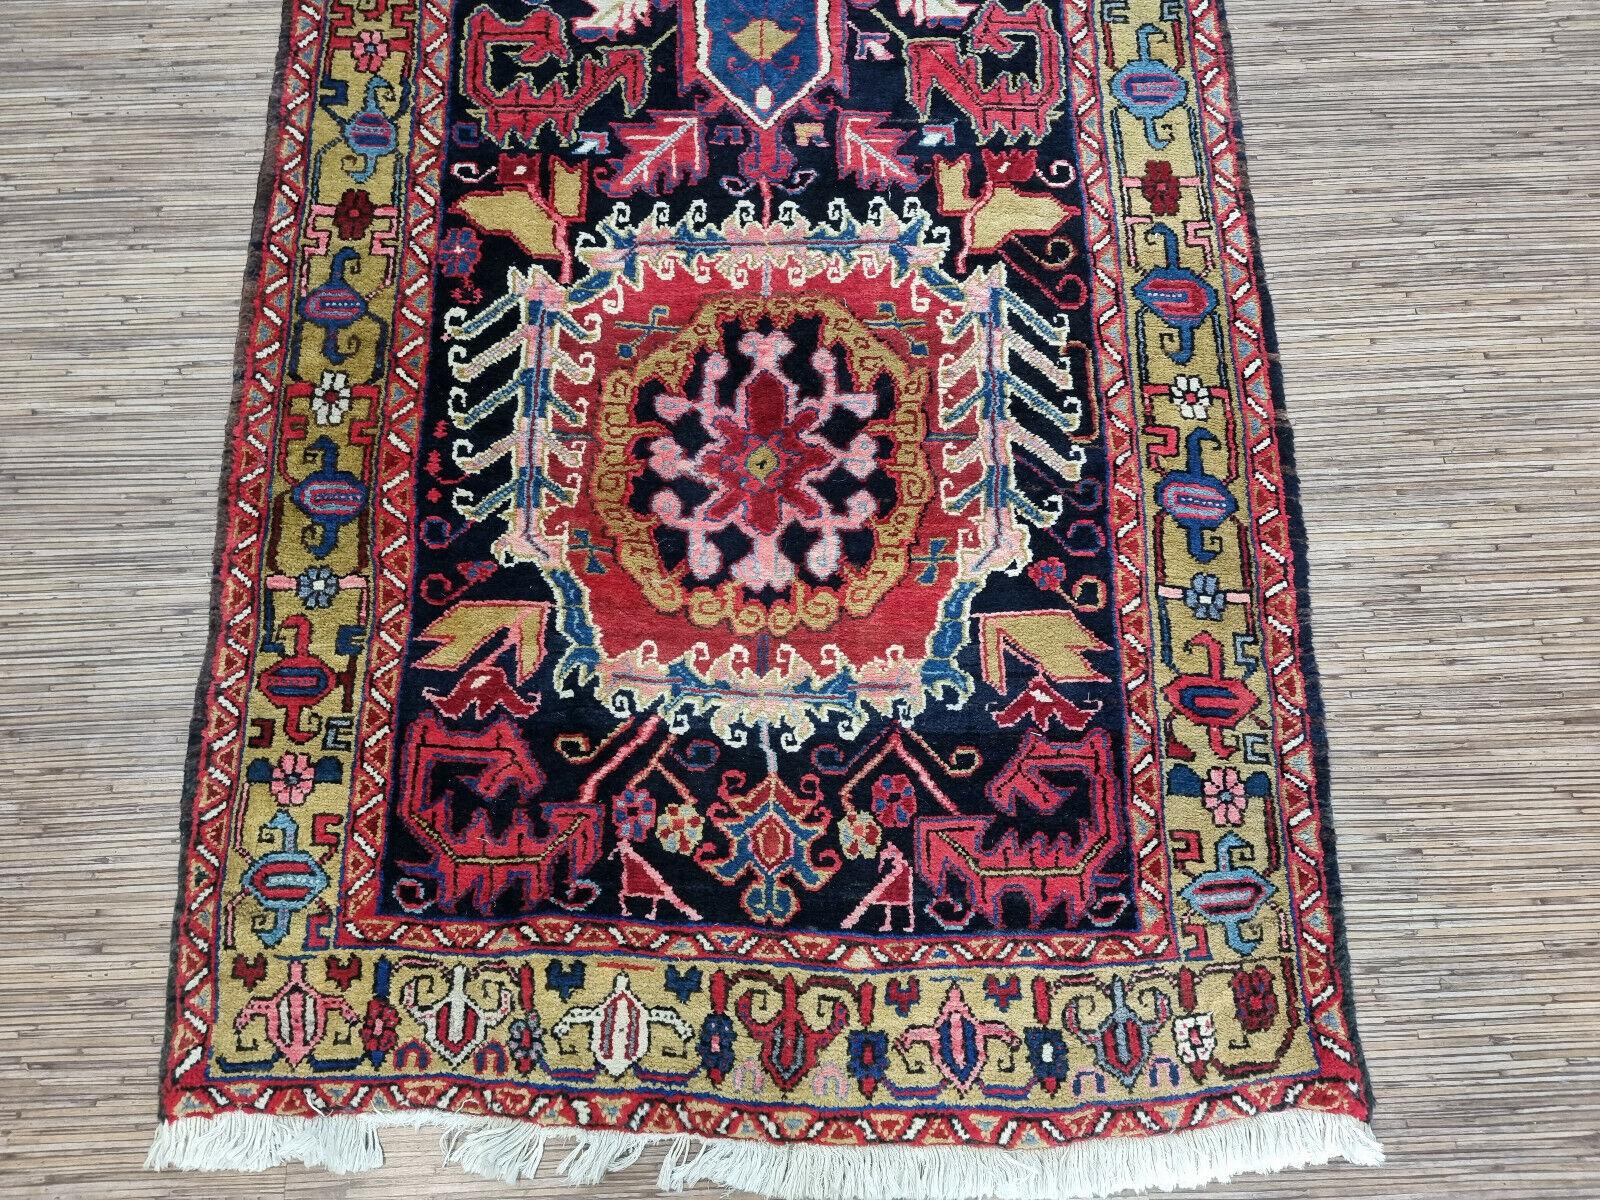 Close-up of vibrant color contrast on Handmade Antique Persian Heriz Runner Rug - Detailed view showcasing the rich color contrast between the red, blue, white, and yellow hues.